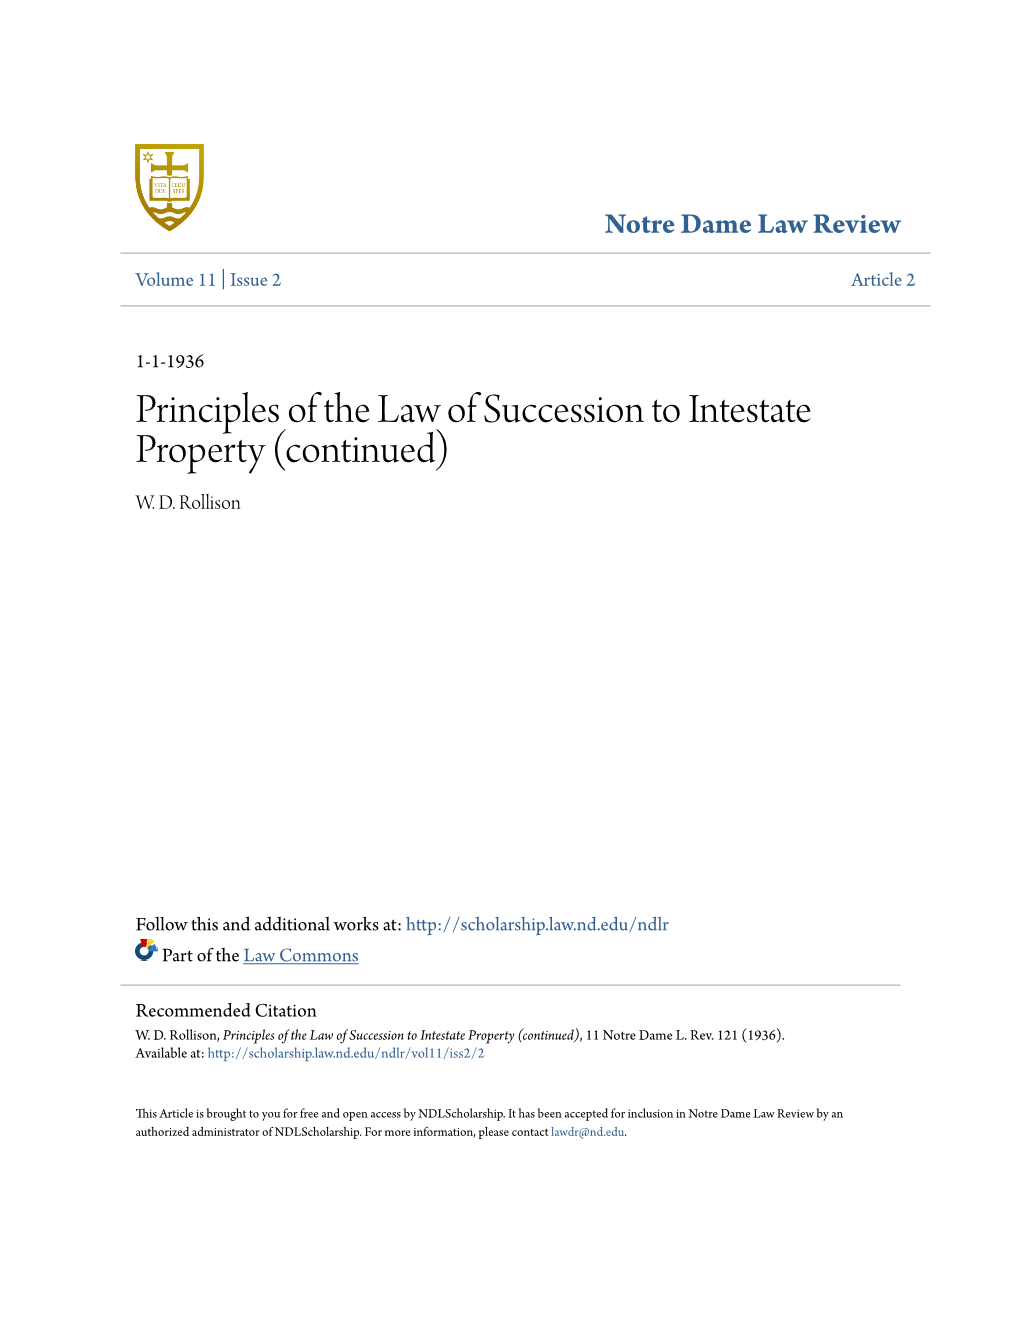 Principles of the Law of Succession to Intestate Property (Continued) W